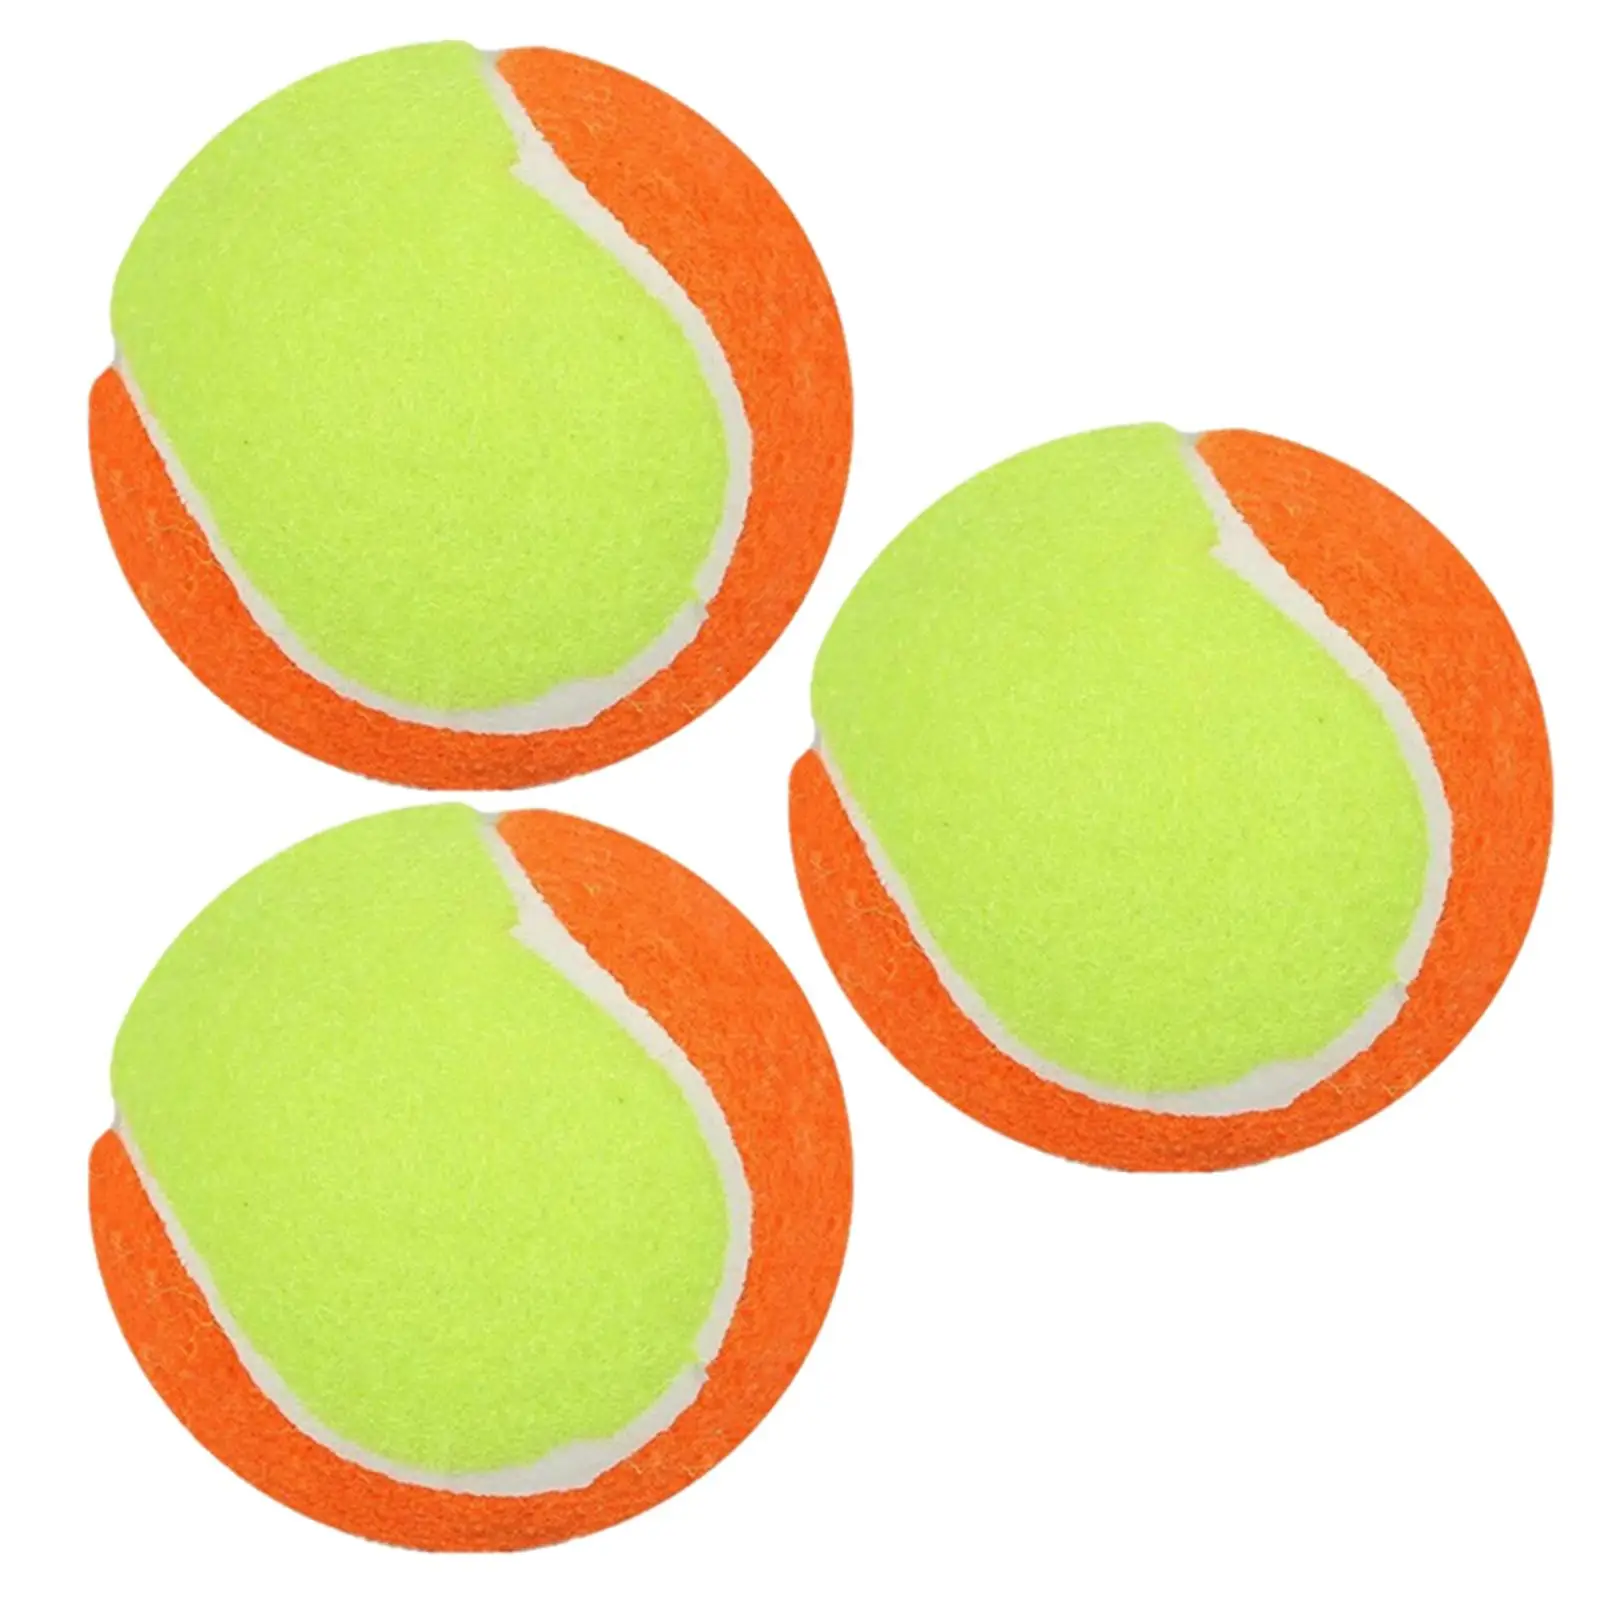 3x Tennis  Easily Track pinwheel Hit  Shots Dog  Toy Soft Tennis Balls for Kids  Ball for Outdoor Adult Dogs